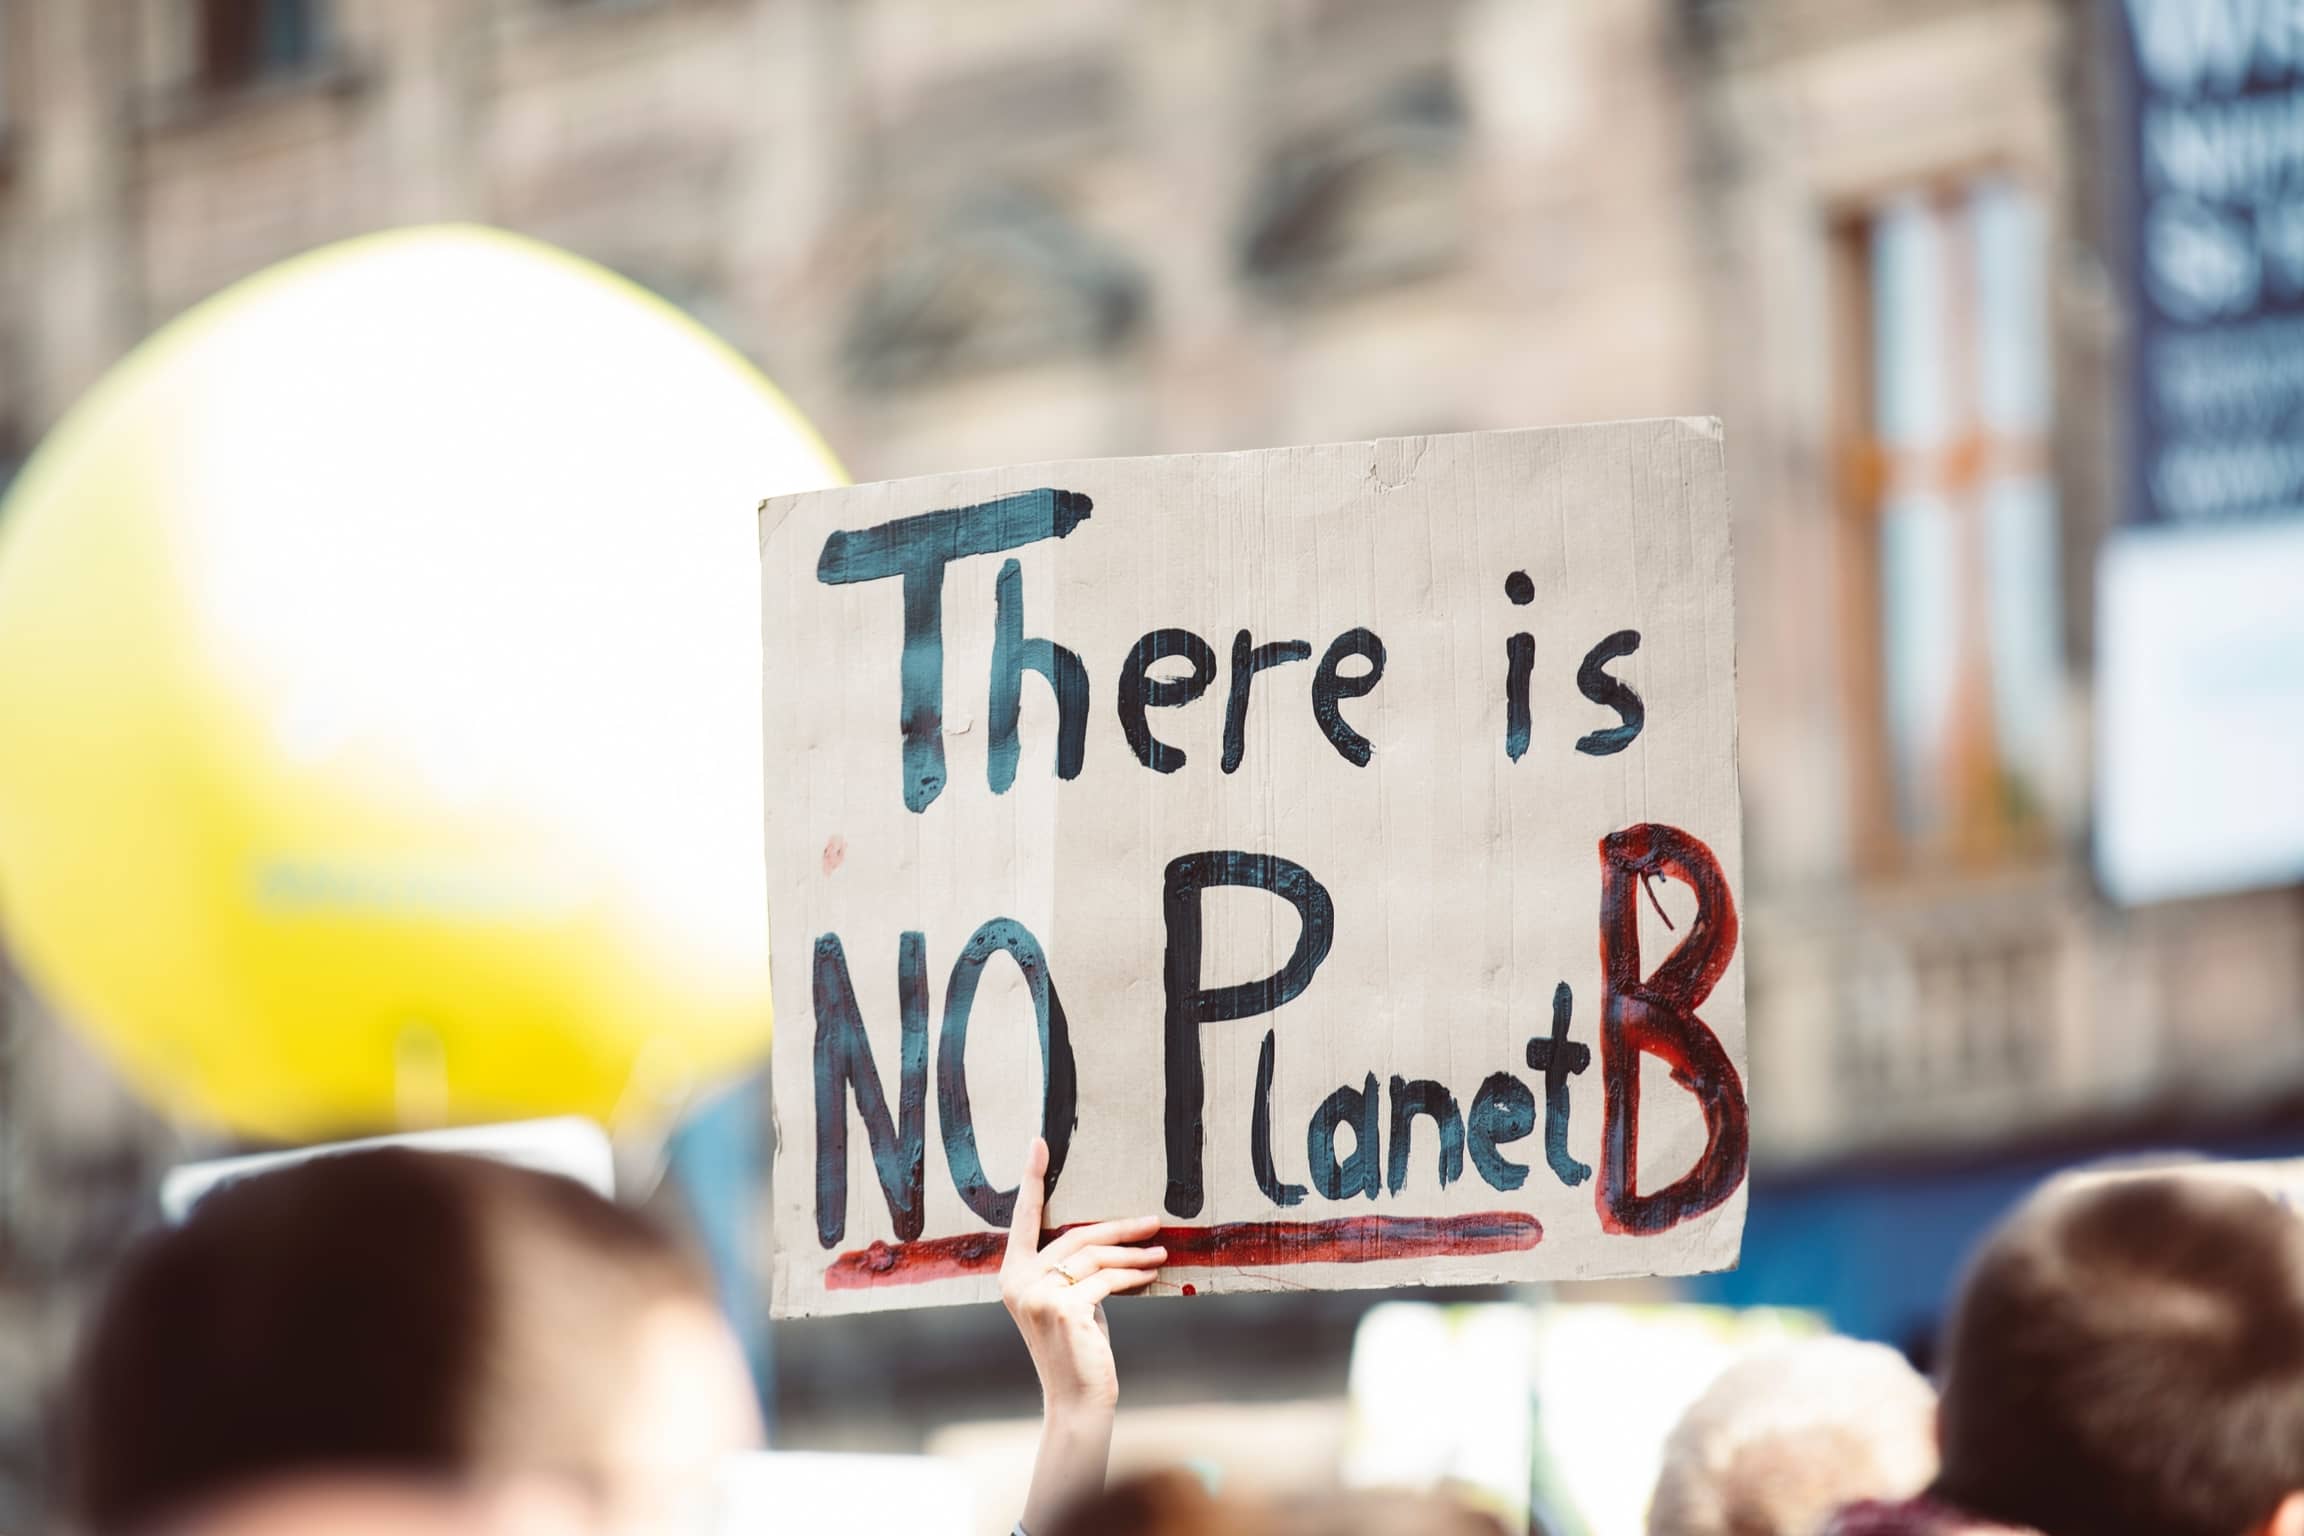 Photo: There is No Planet B (Source: Unsplash)